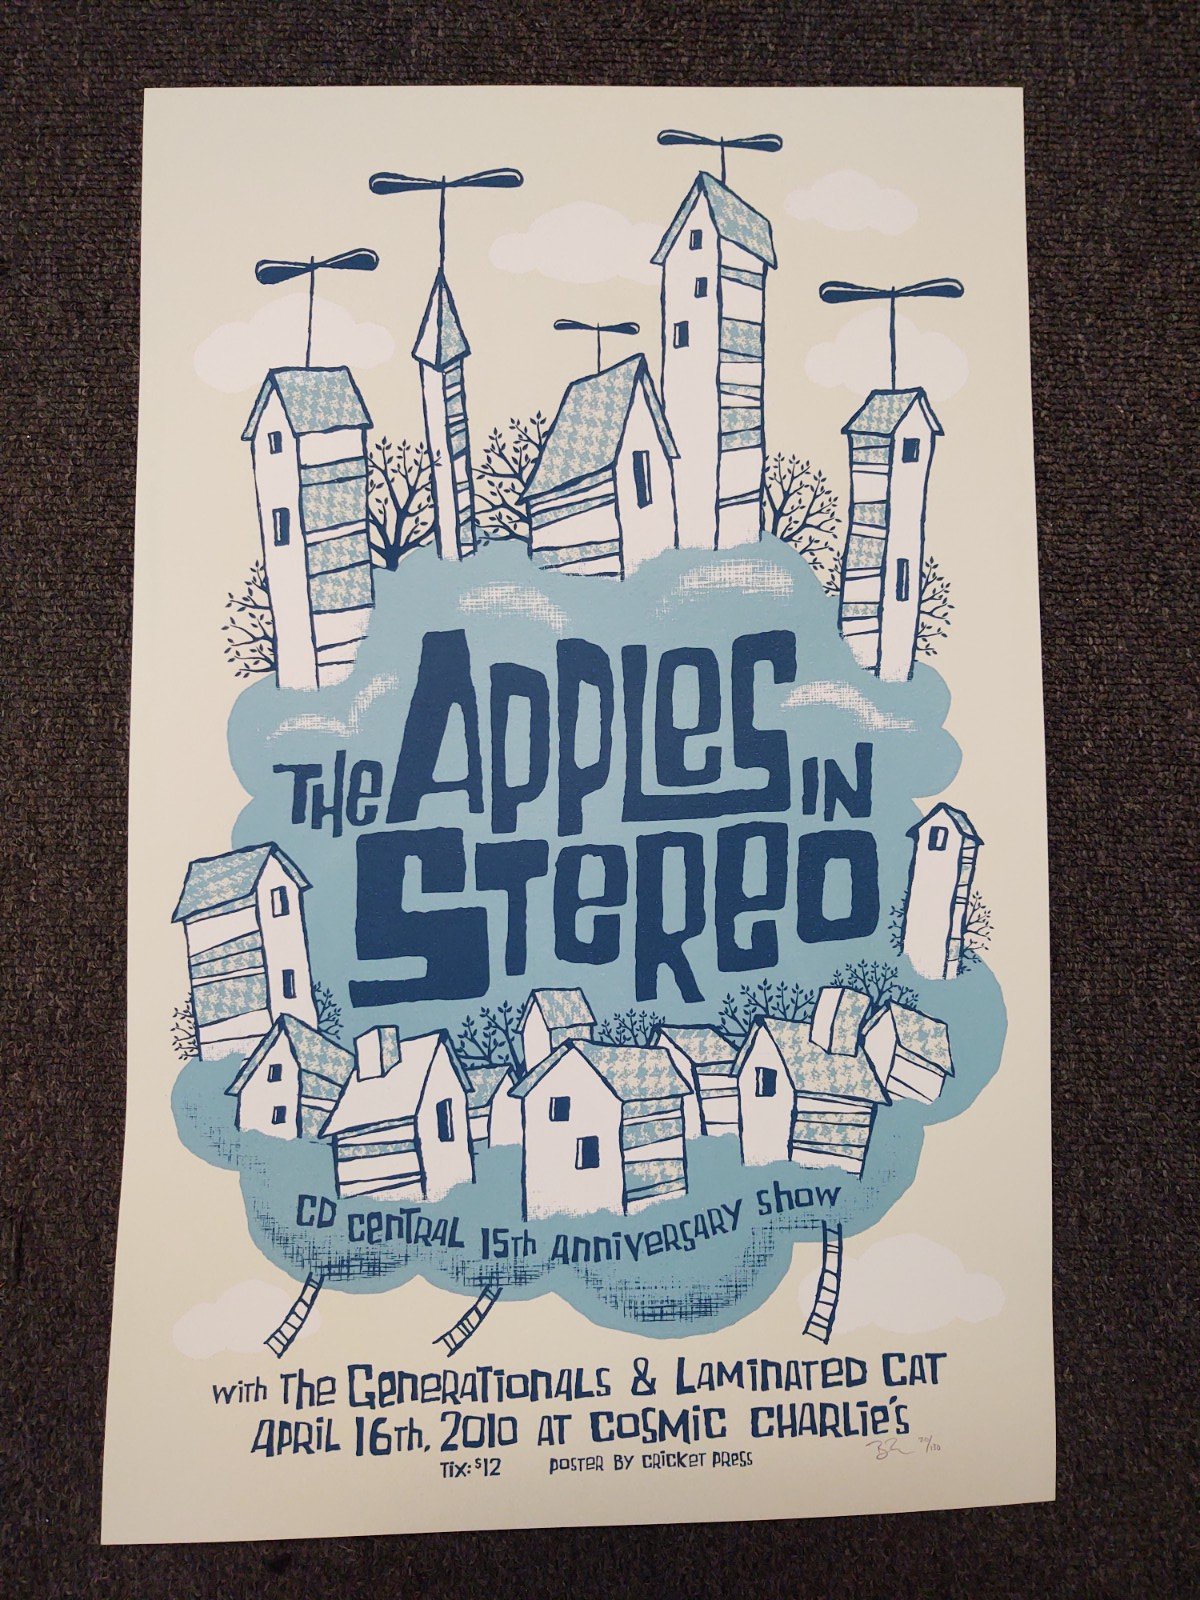 Apples in Stereo Screenprint Poster / CD Central 15th | CD Central